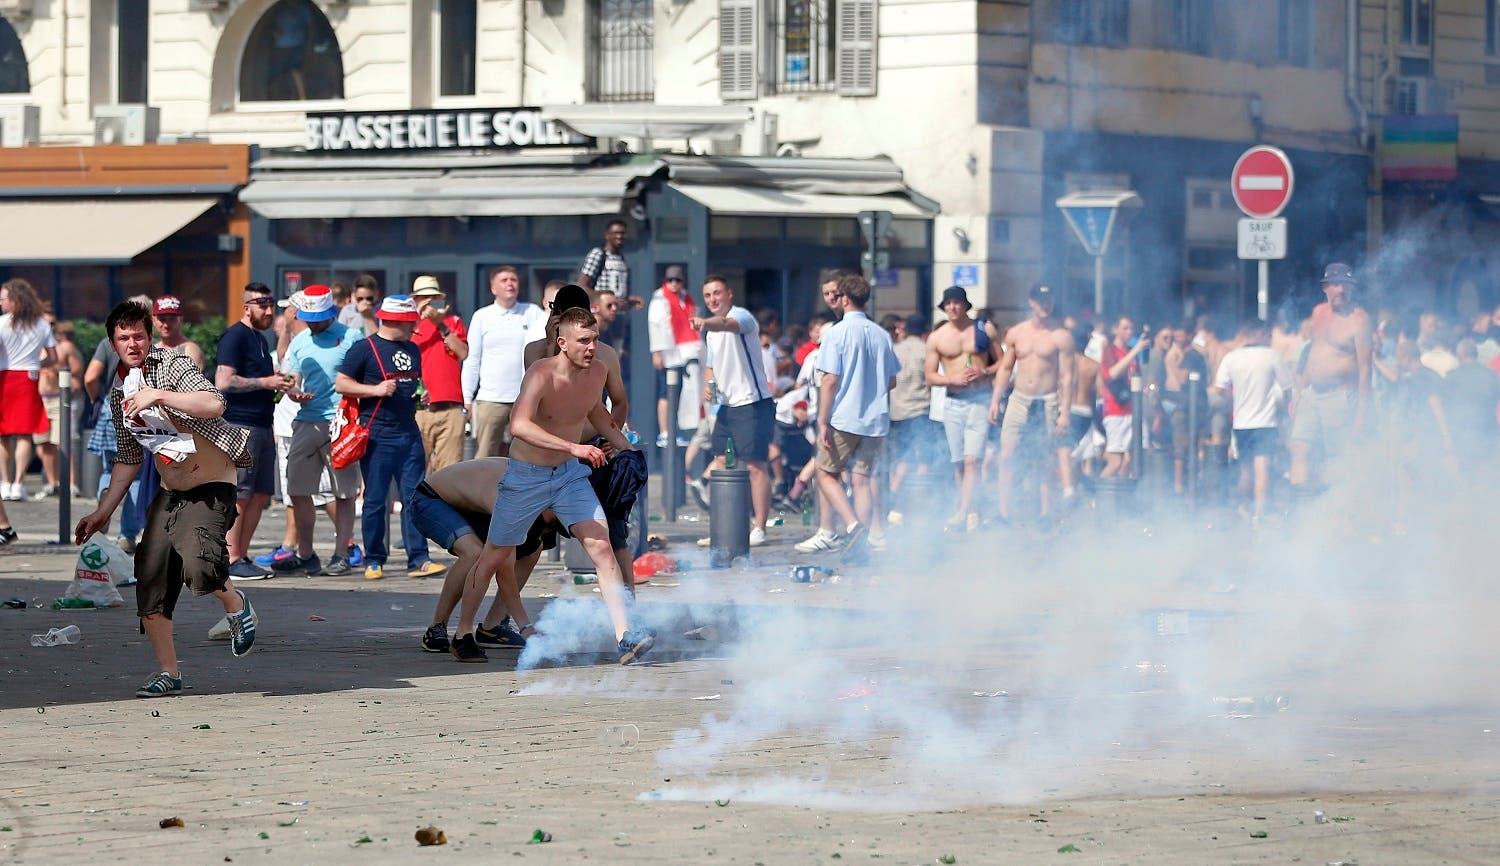 Teargas is fired at England supporters in downtown Marseille, France, Saturiday, June 11, 2016. Two nights of clashes between England supporters, French police and locals have marked the build up to Saturday's Euro 2016 soccer Championship match between England and Russia. (AP)